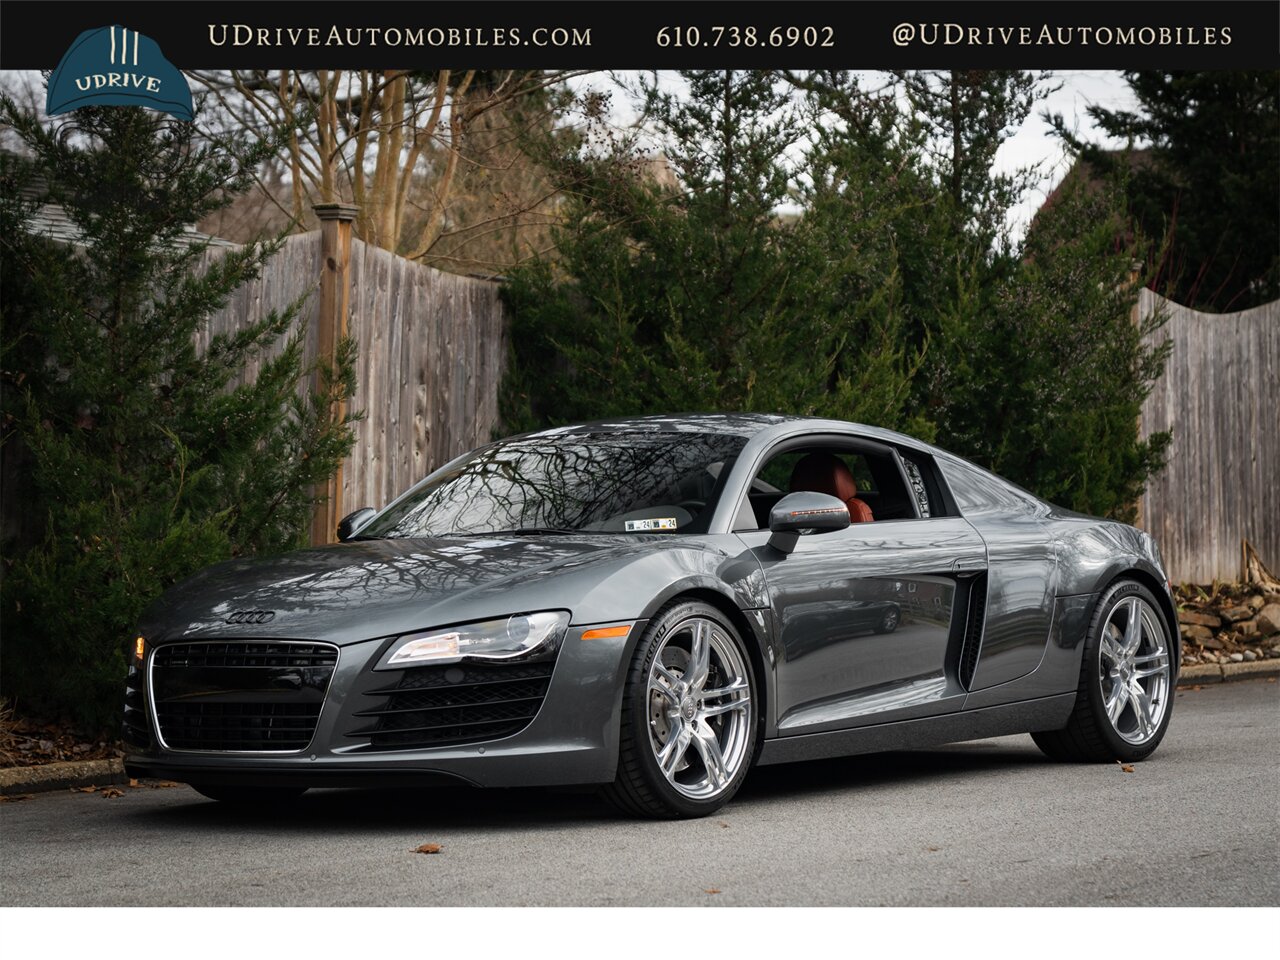 2009 Audi R8 Quattro  4.2 V8 6 Speed Manual 15k Miles - Photo 7 - West Chester, PA 19382